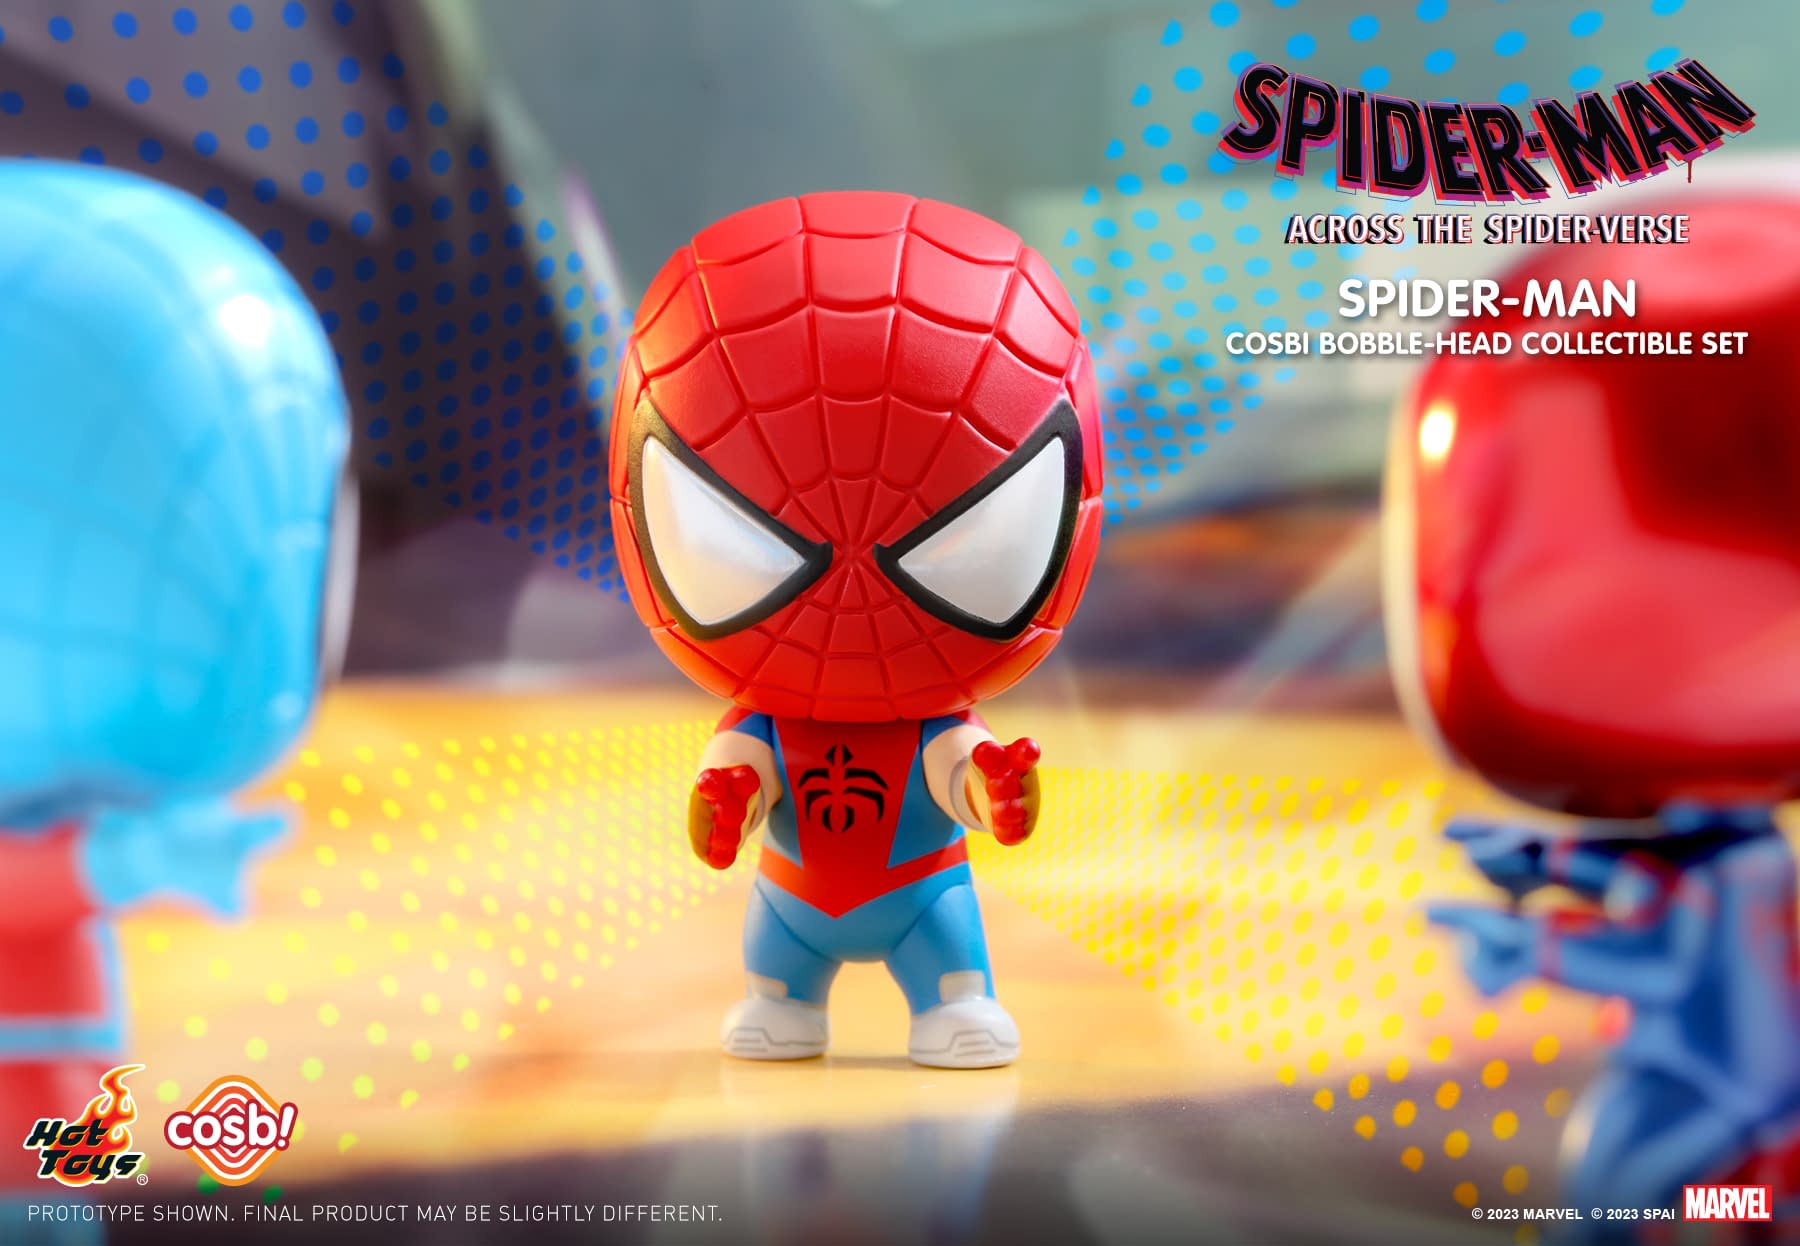 Enter the Spider Society with Hot Toys Newest Spider-Man Cosbi Set6